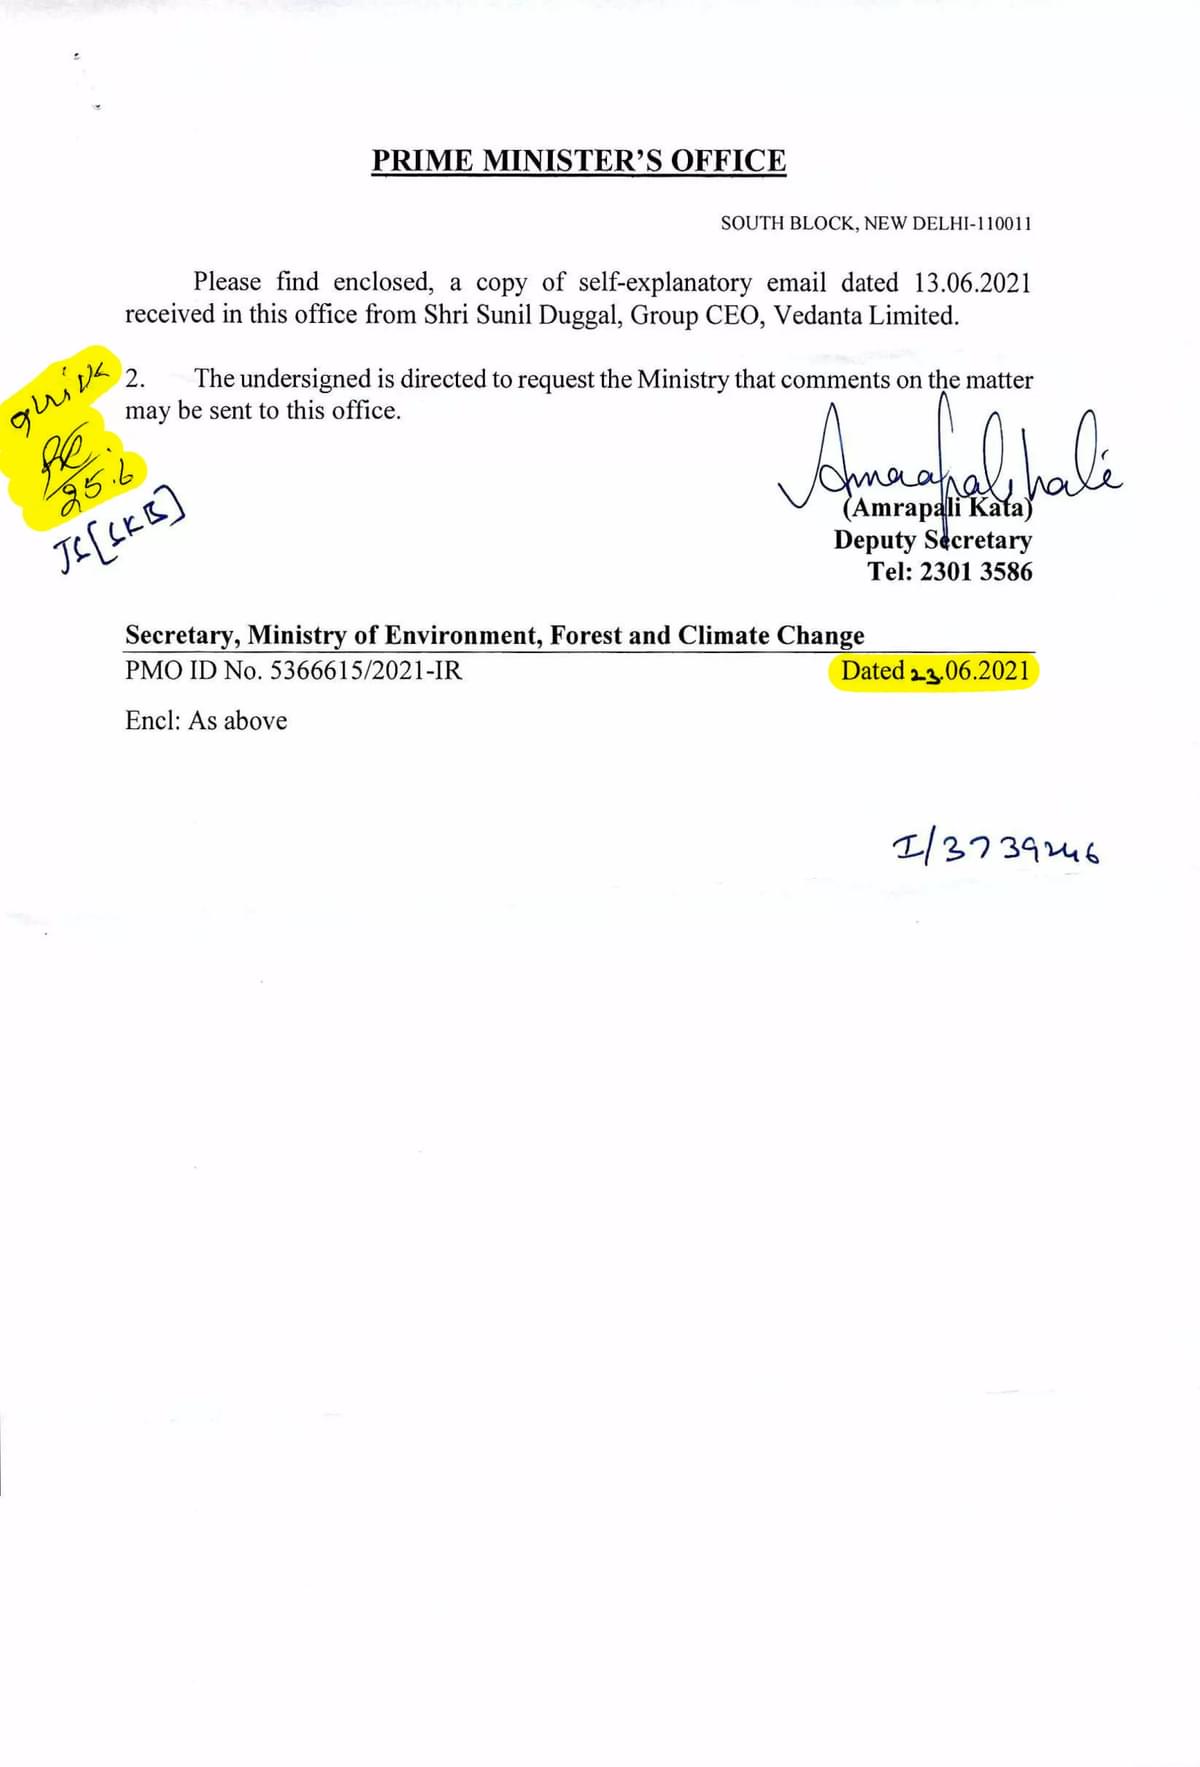 investigations/vedanta-ceo-letter-page1.jpg